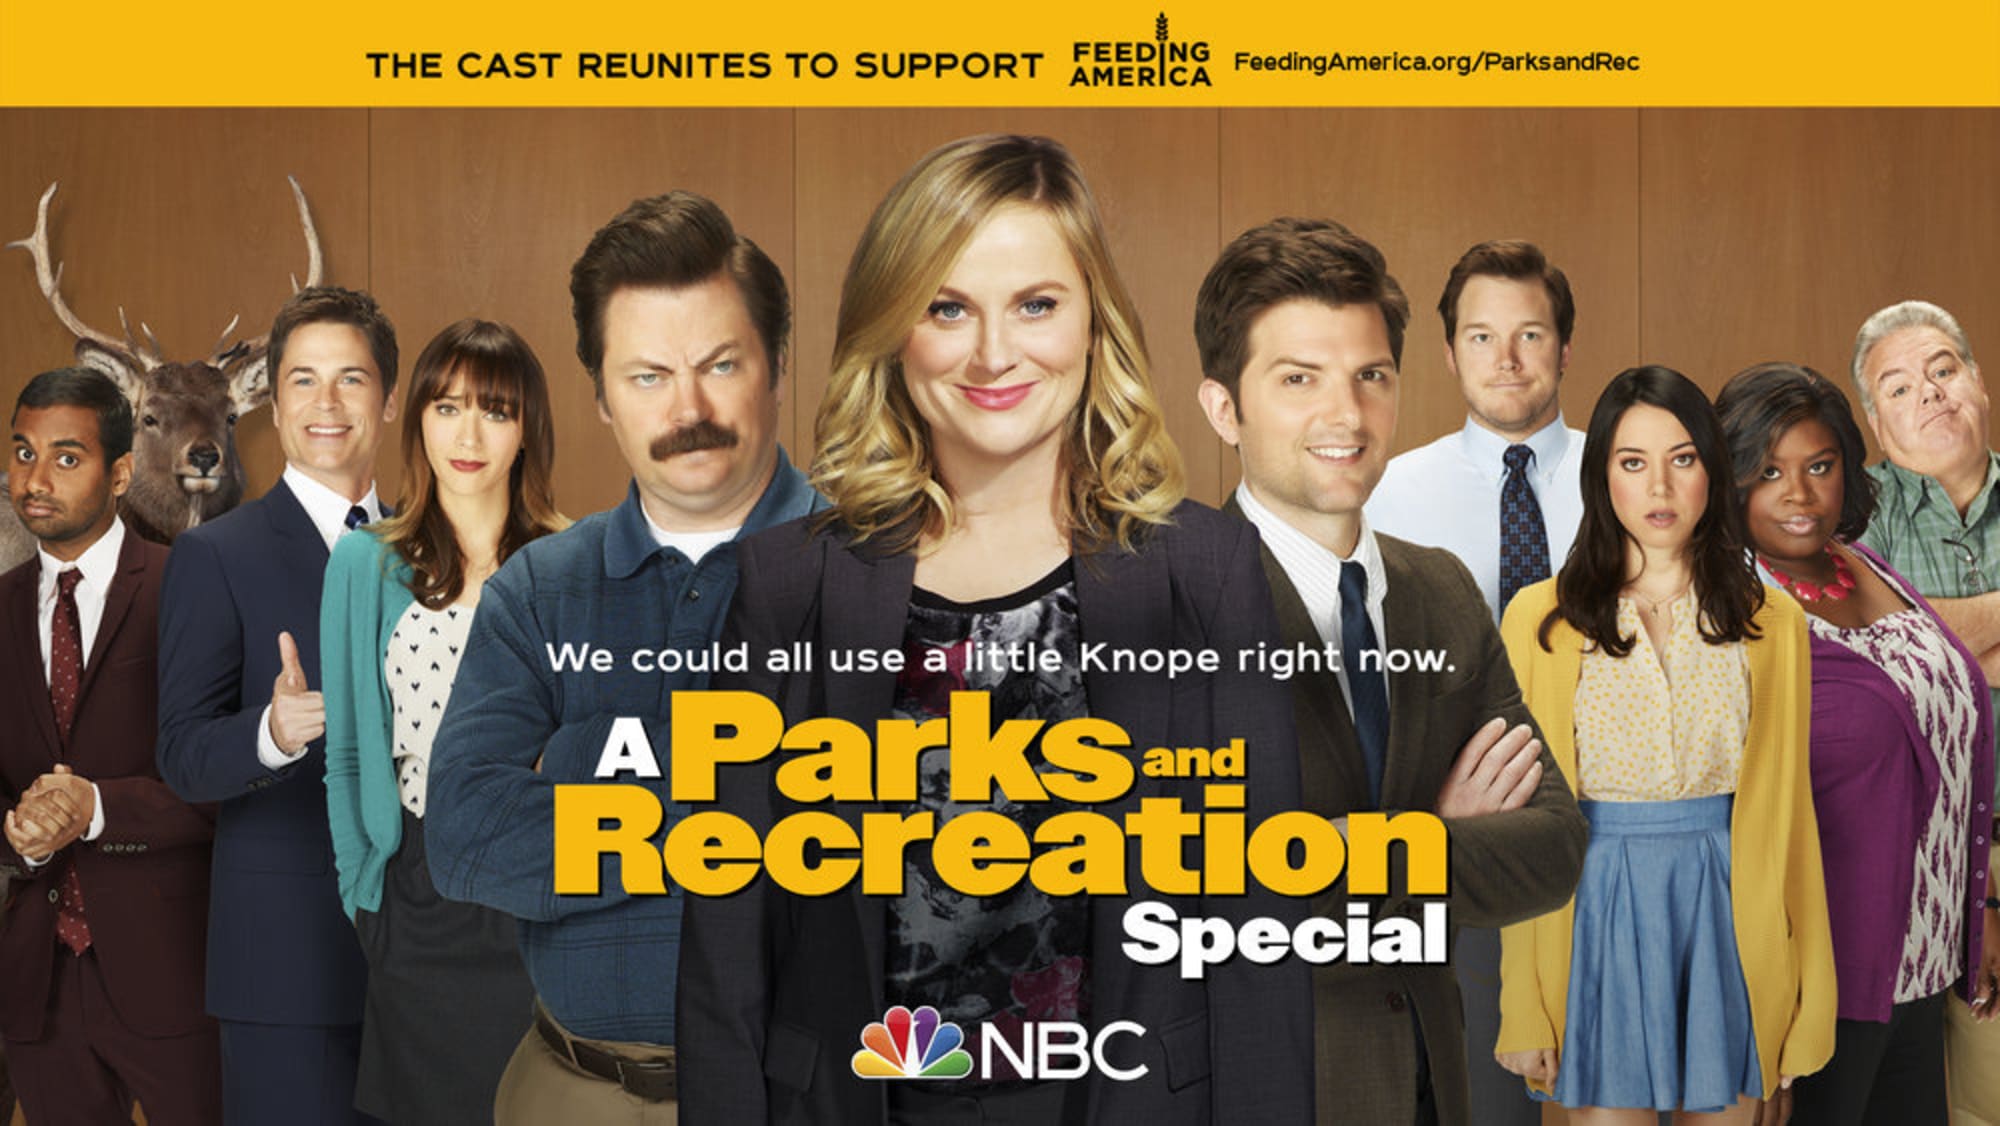 20 memes to celebrate Parks and Recreation before it leaves Netflix